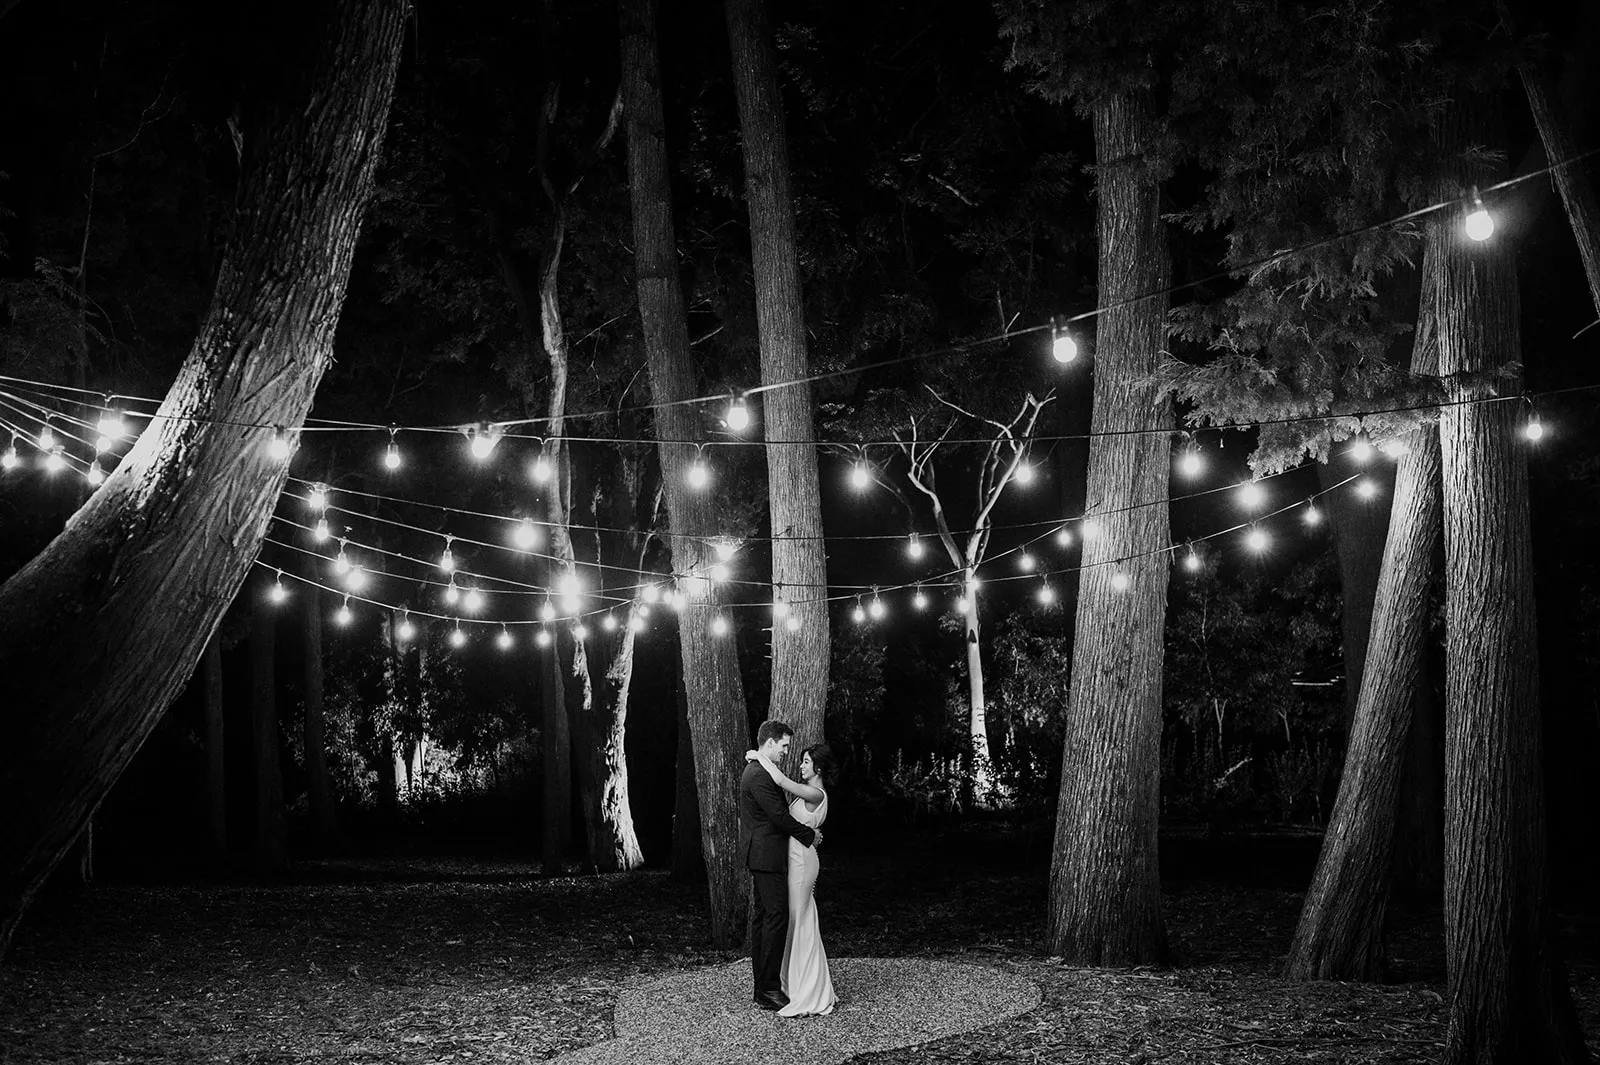 A couple embraces under a canopy of string lights in a forest at night. The warm lights contrast with the dark trees, creating a romantic and intimate atmosphere. The bride is in a long dress, and the groom is in a suit.